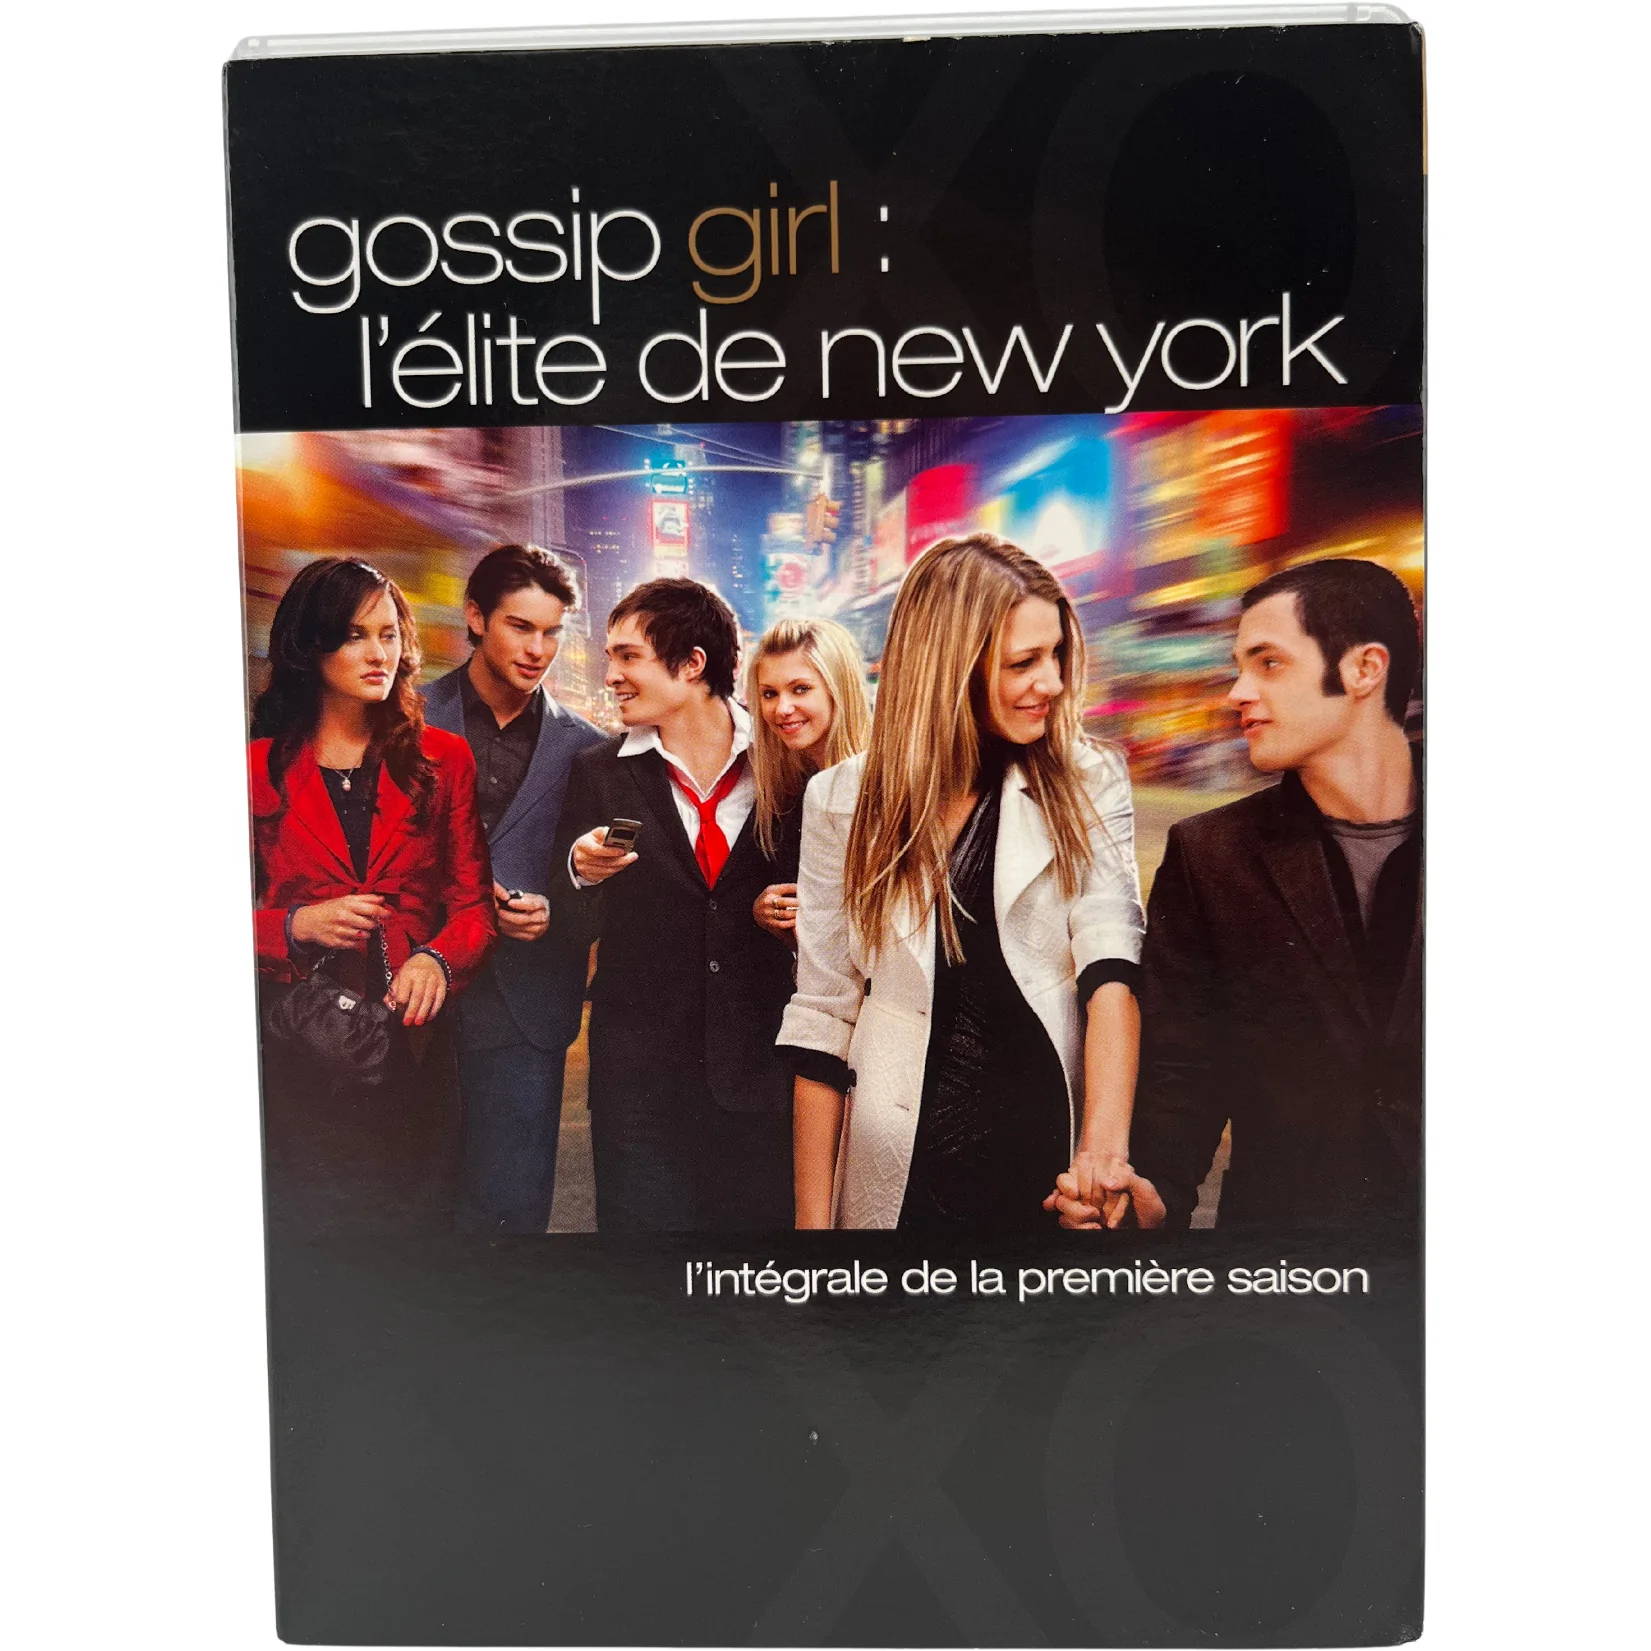 https://www.canadawideliquidations.com/wp-content/uploads/2022/06/products-GossipGirl.png